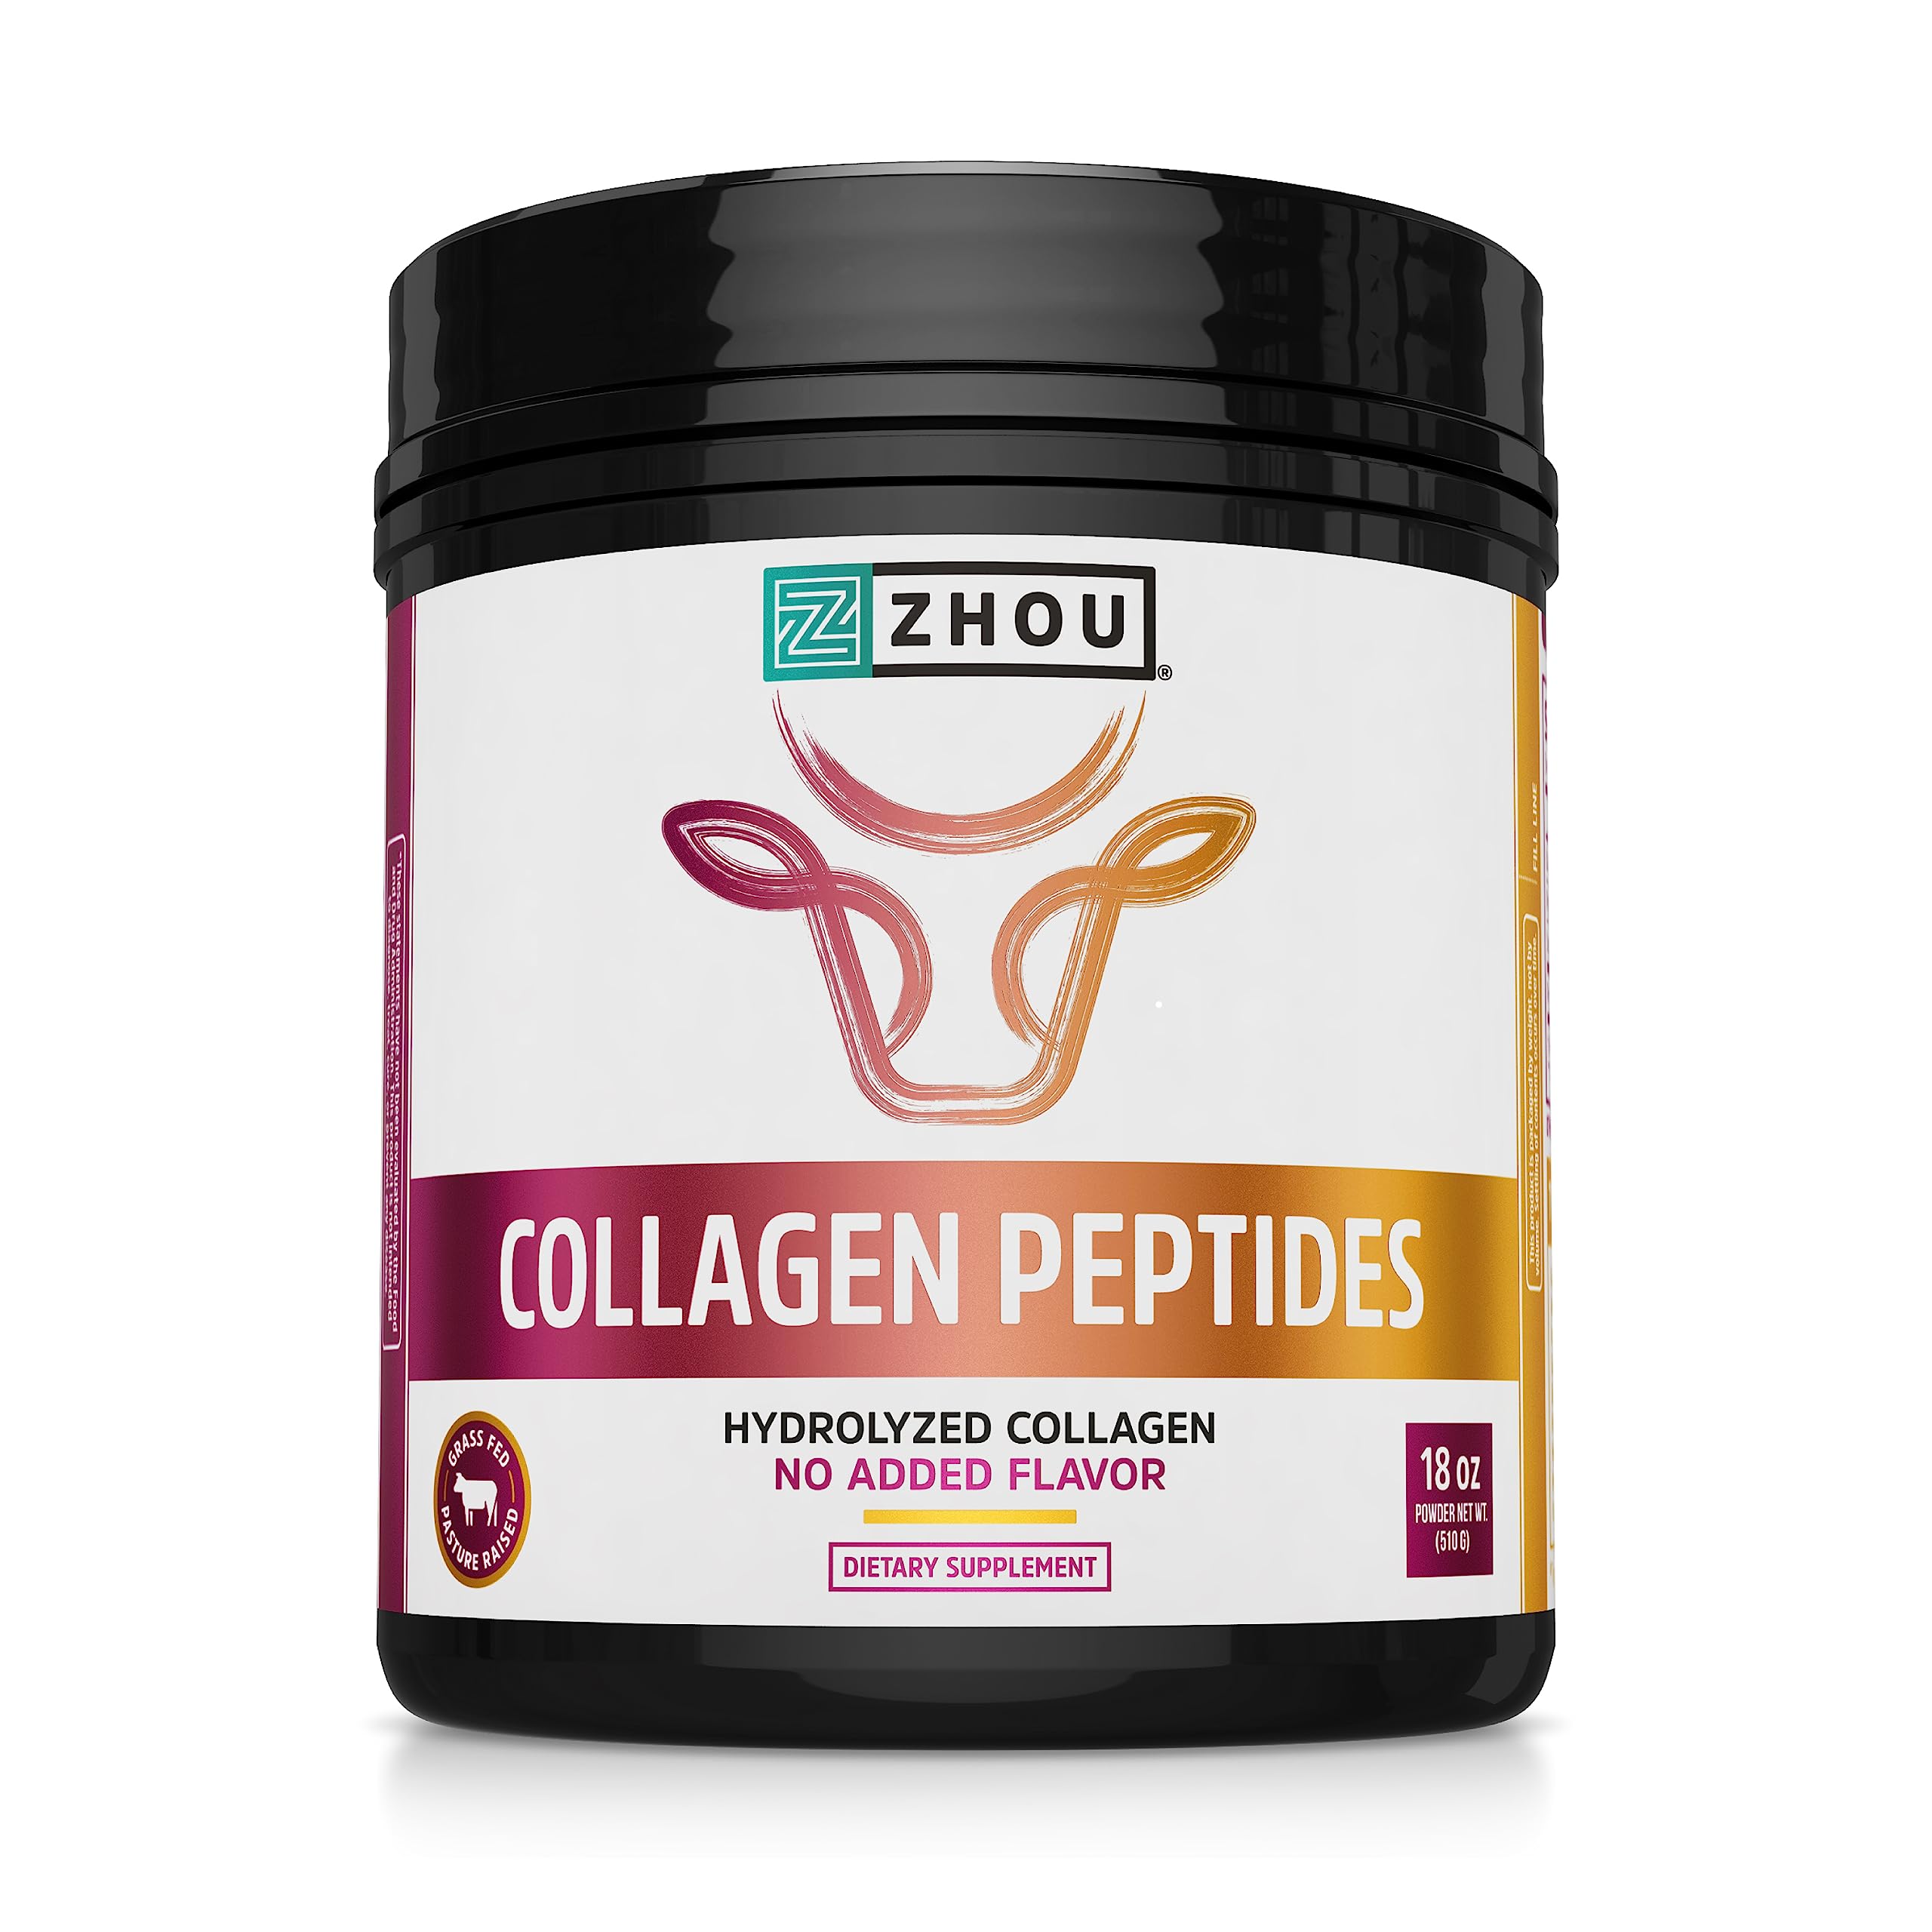 Zhou Collagen Peptides Hydrolyzed Protein Powder – Grass Fed, Pasture Raised, Unflavored, Hormone-Free, Non-GMO,18 Ounce